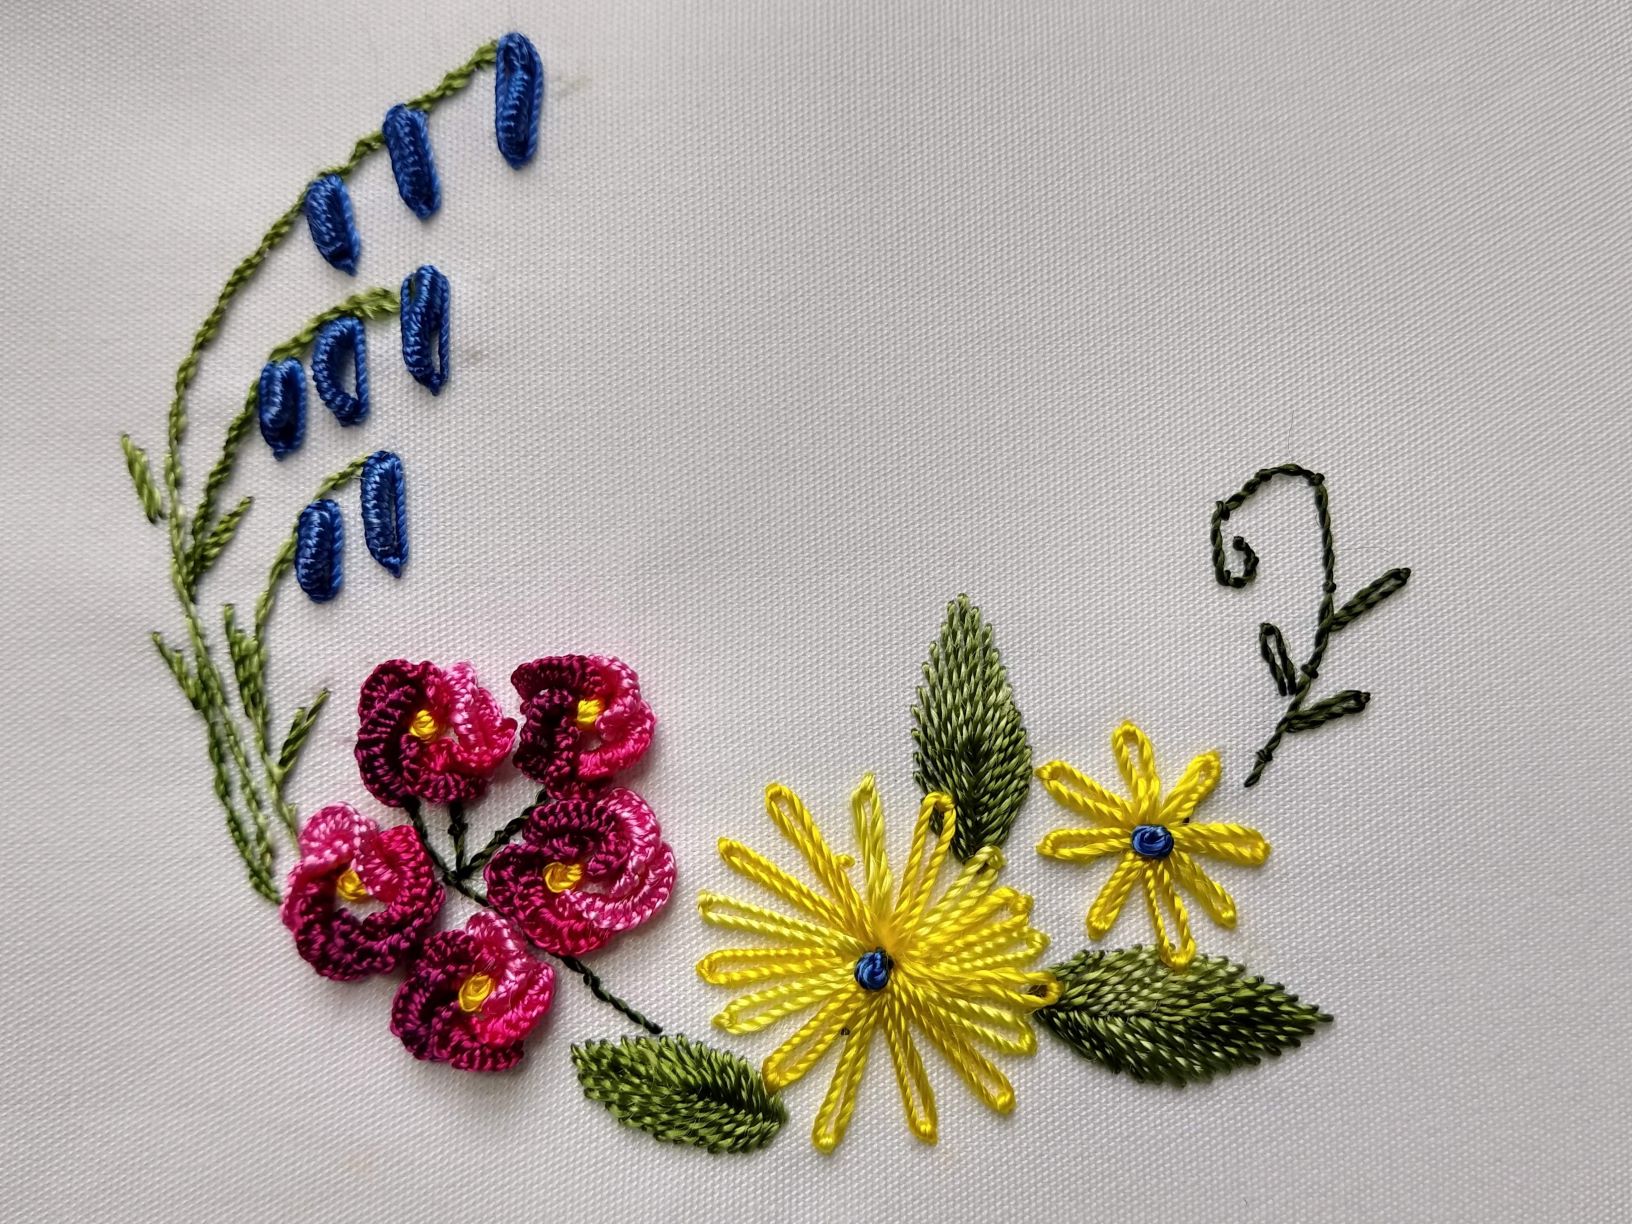 New Member Resources: A Guide to Brazilian Dimensional Embroidery and a Dorset Buttons Petite Project